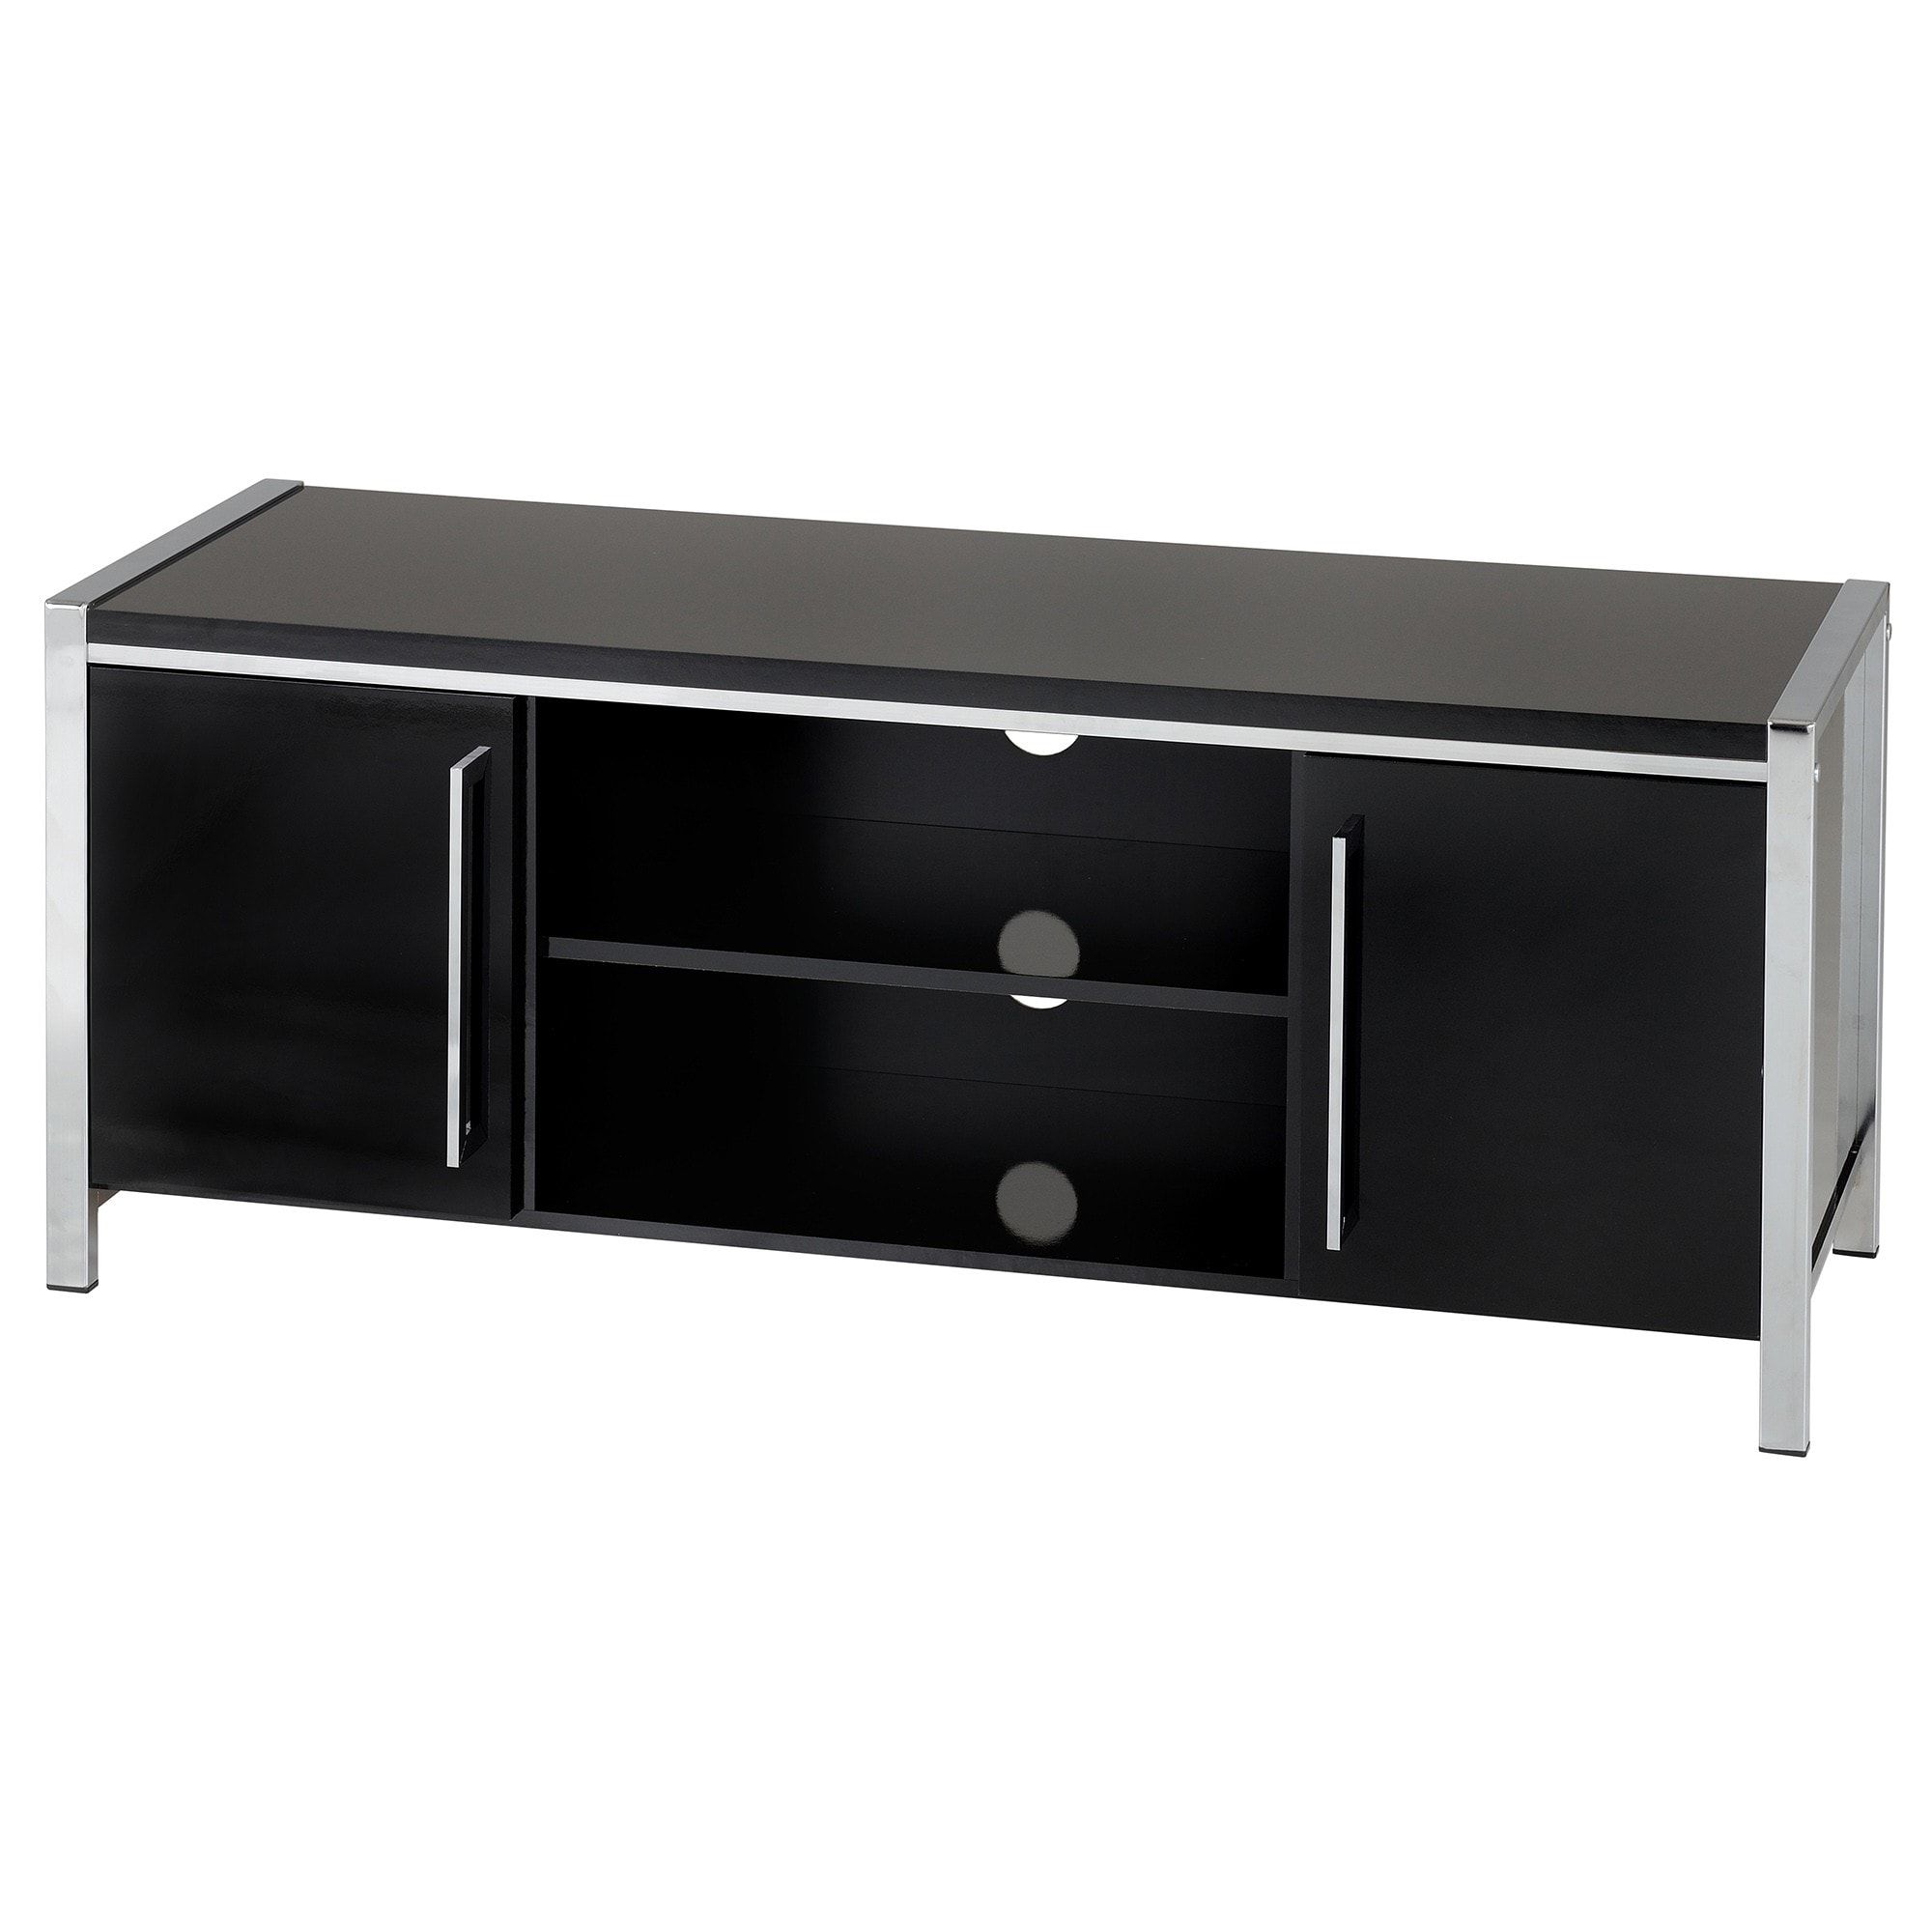 Charisma 2 Door Tv Unit | Modern Furniture | Tv Units With Regard To Charisma Tv Stands (Gallery 4 of 20)